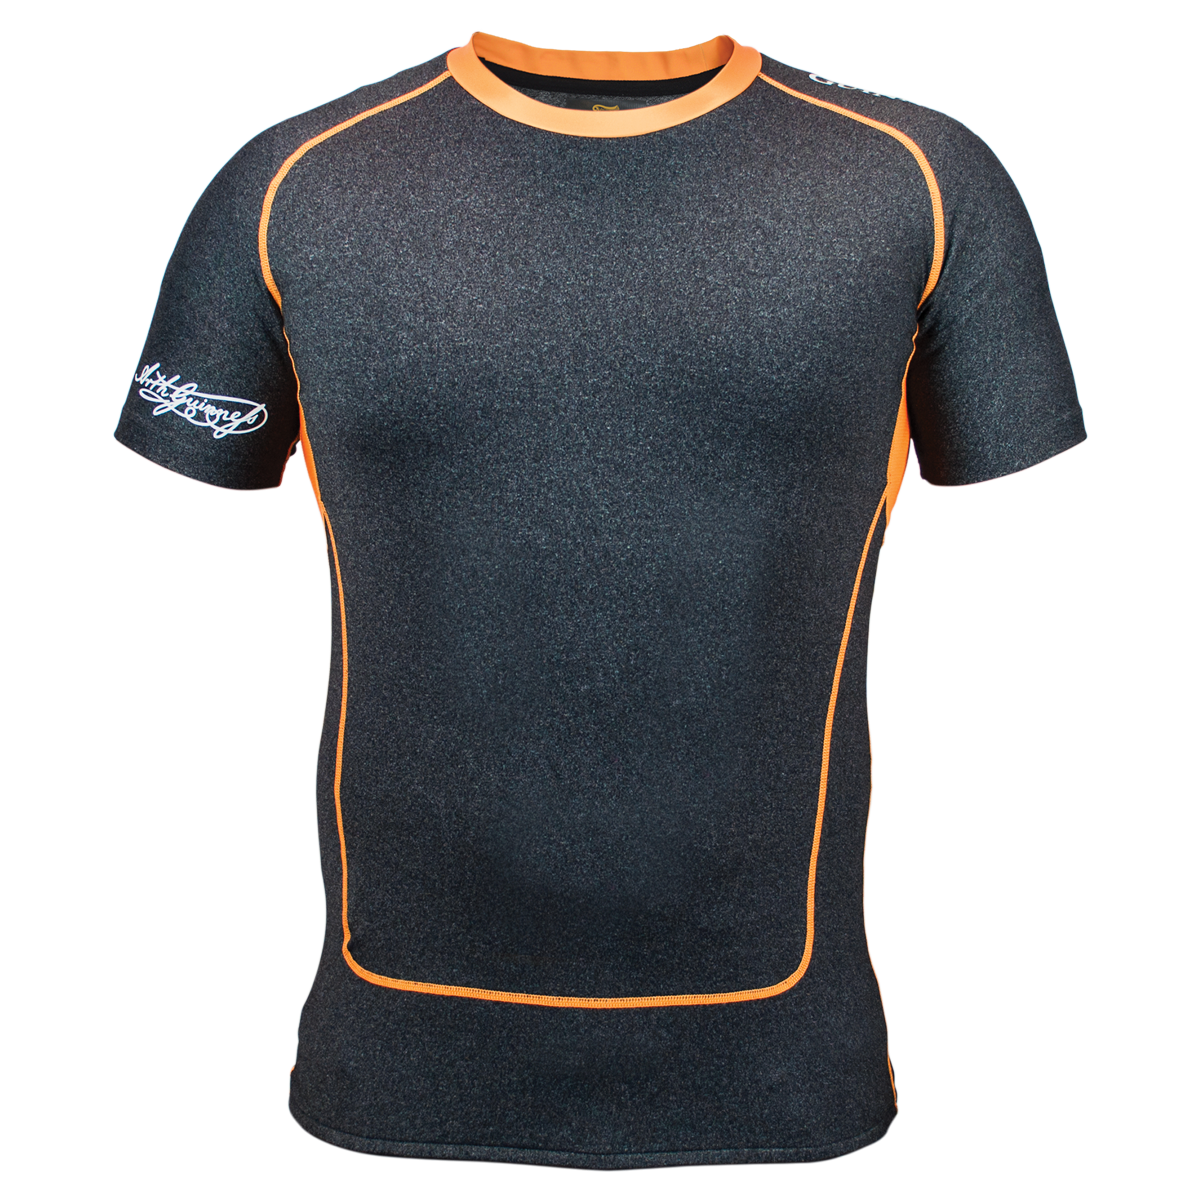 A Guinness Compression Top Orange by Guinness UK, perfect for the gym.